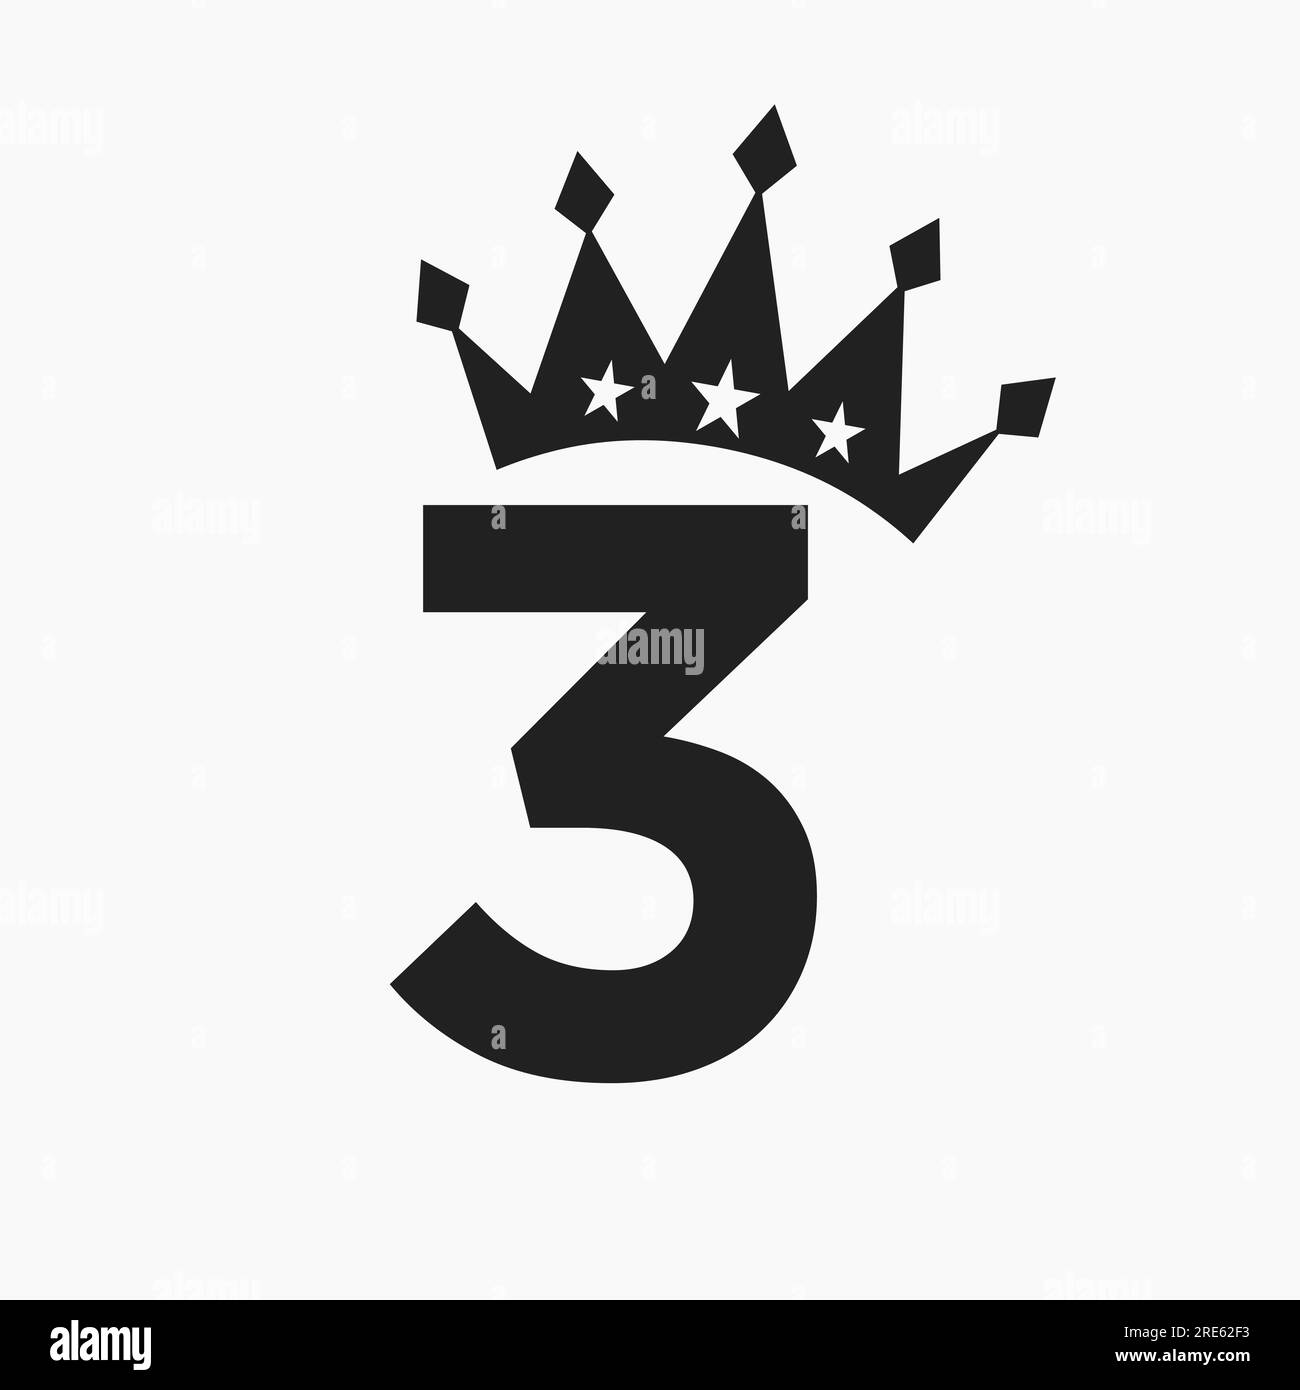 Crown Logo On Letter 3 Luxury Symbol. Crown Logotype Template Stock Vector